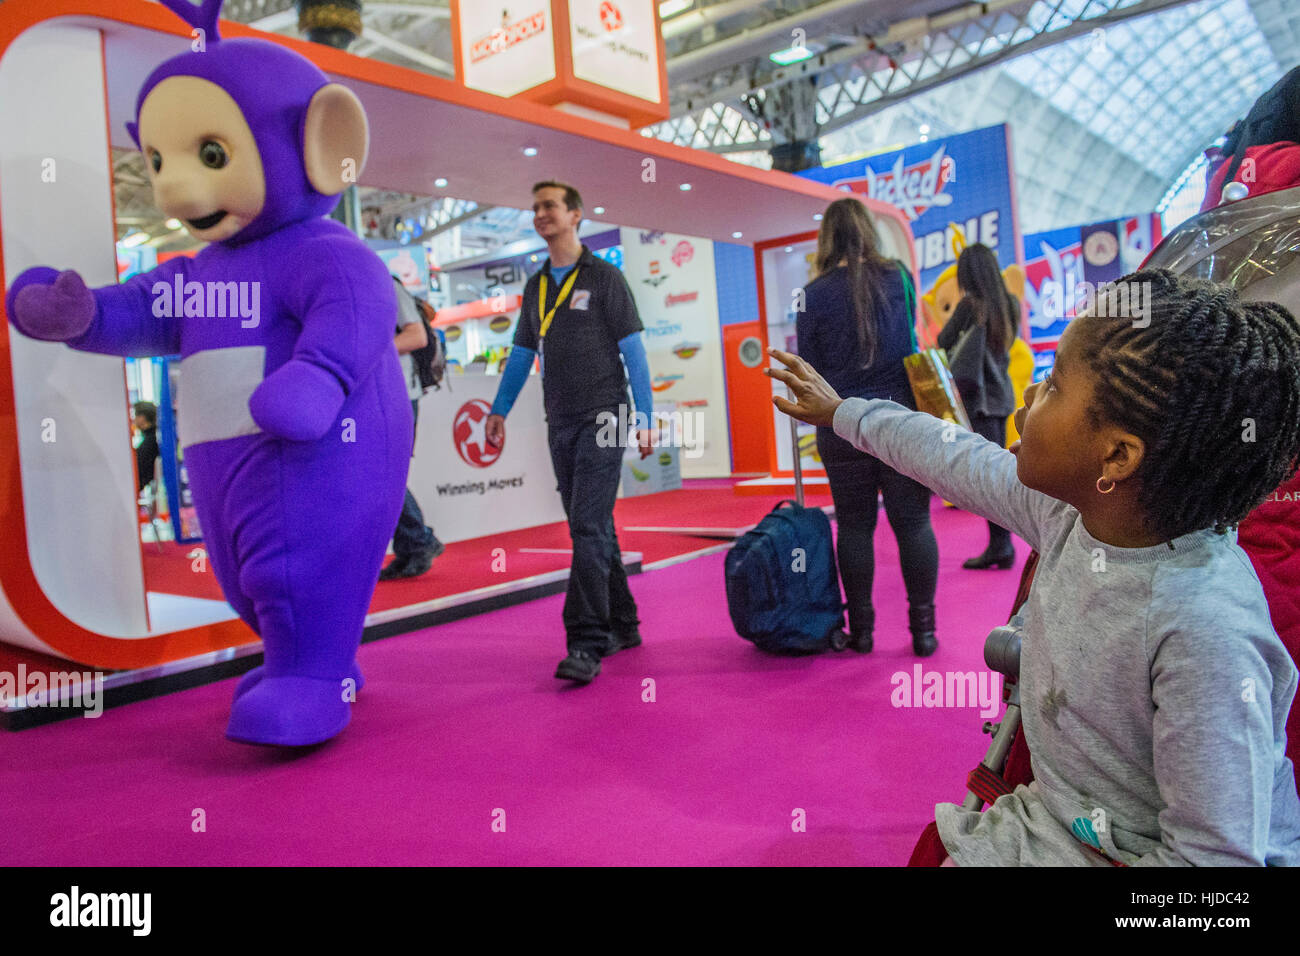 London, UK. 24th Jan, 2017. The Teletubbies celebrate their 20th anniversary but dont see a young admirer - The London Toy Fair opens at Olympia exhibition centre. Organised by the British Toy and Hobby Association it is the only dedicated toy, game and hobby trade exhibition in the UK. It runs for three days, with more than 240 exhibiting companies ranging from the large internationals to the new start up companies. London 24/01/17 Credit: Guy Bell/Alamy Live News Stock Photo